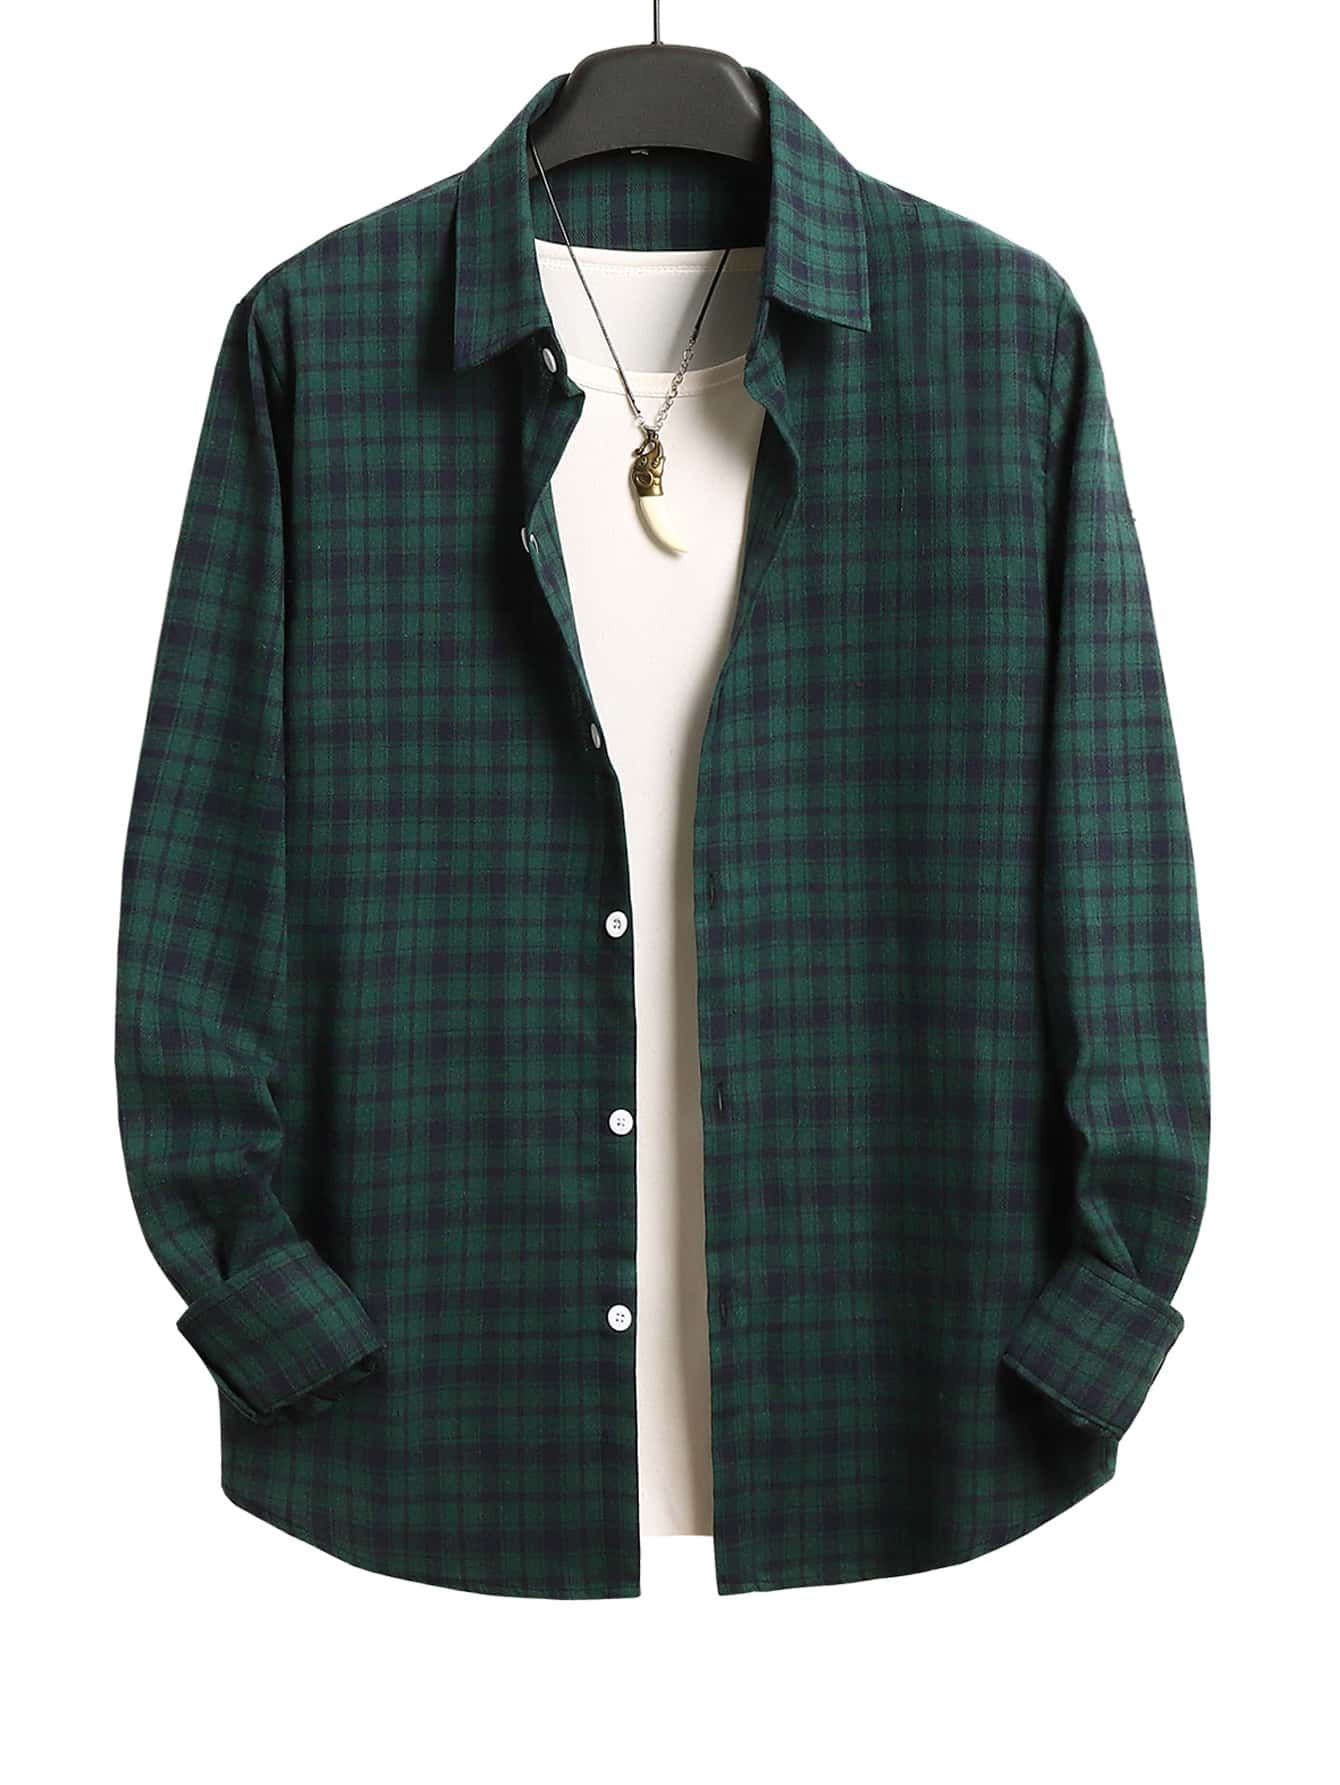 Plaid Shirts for Men: Timeless Style for Every Wardrobe